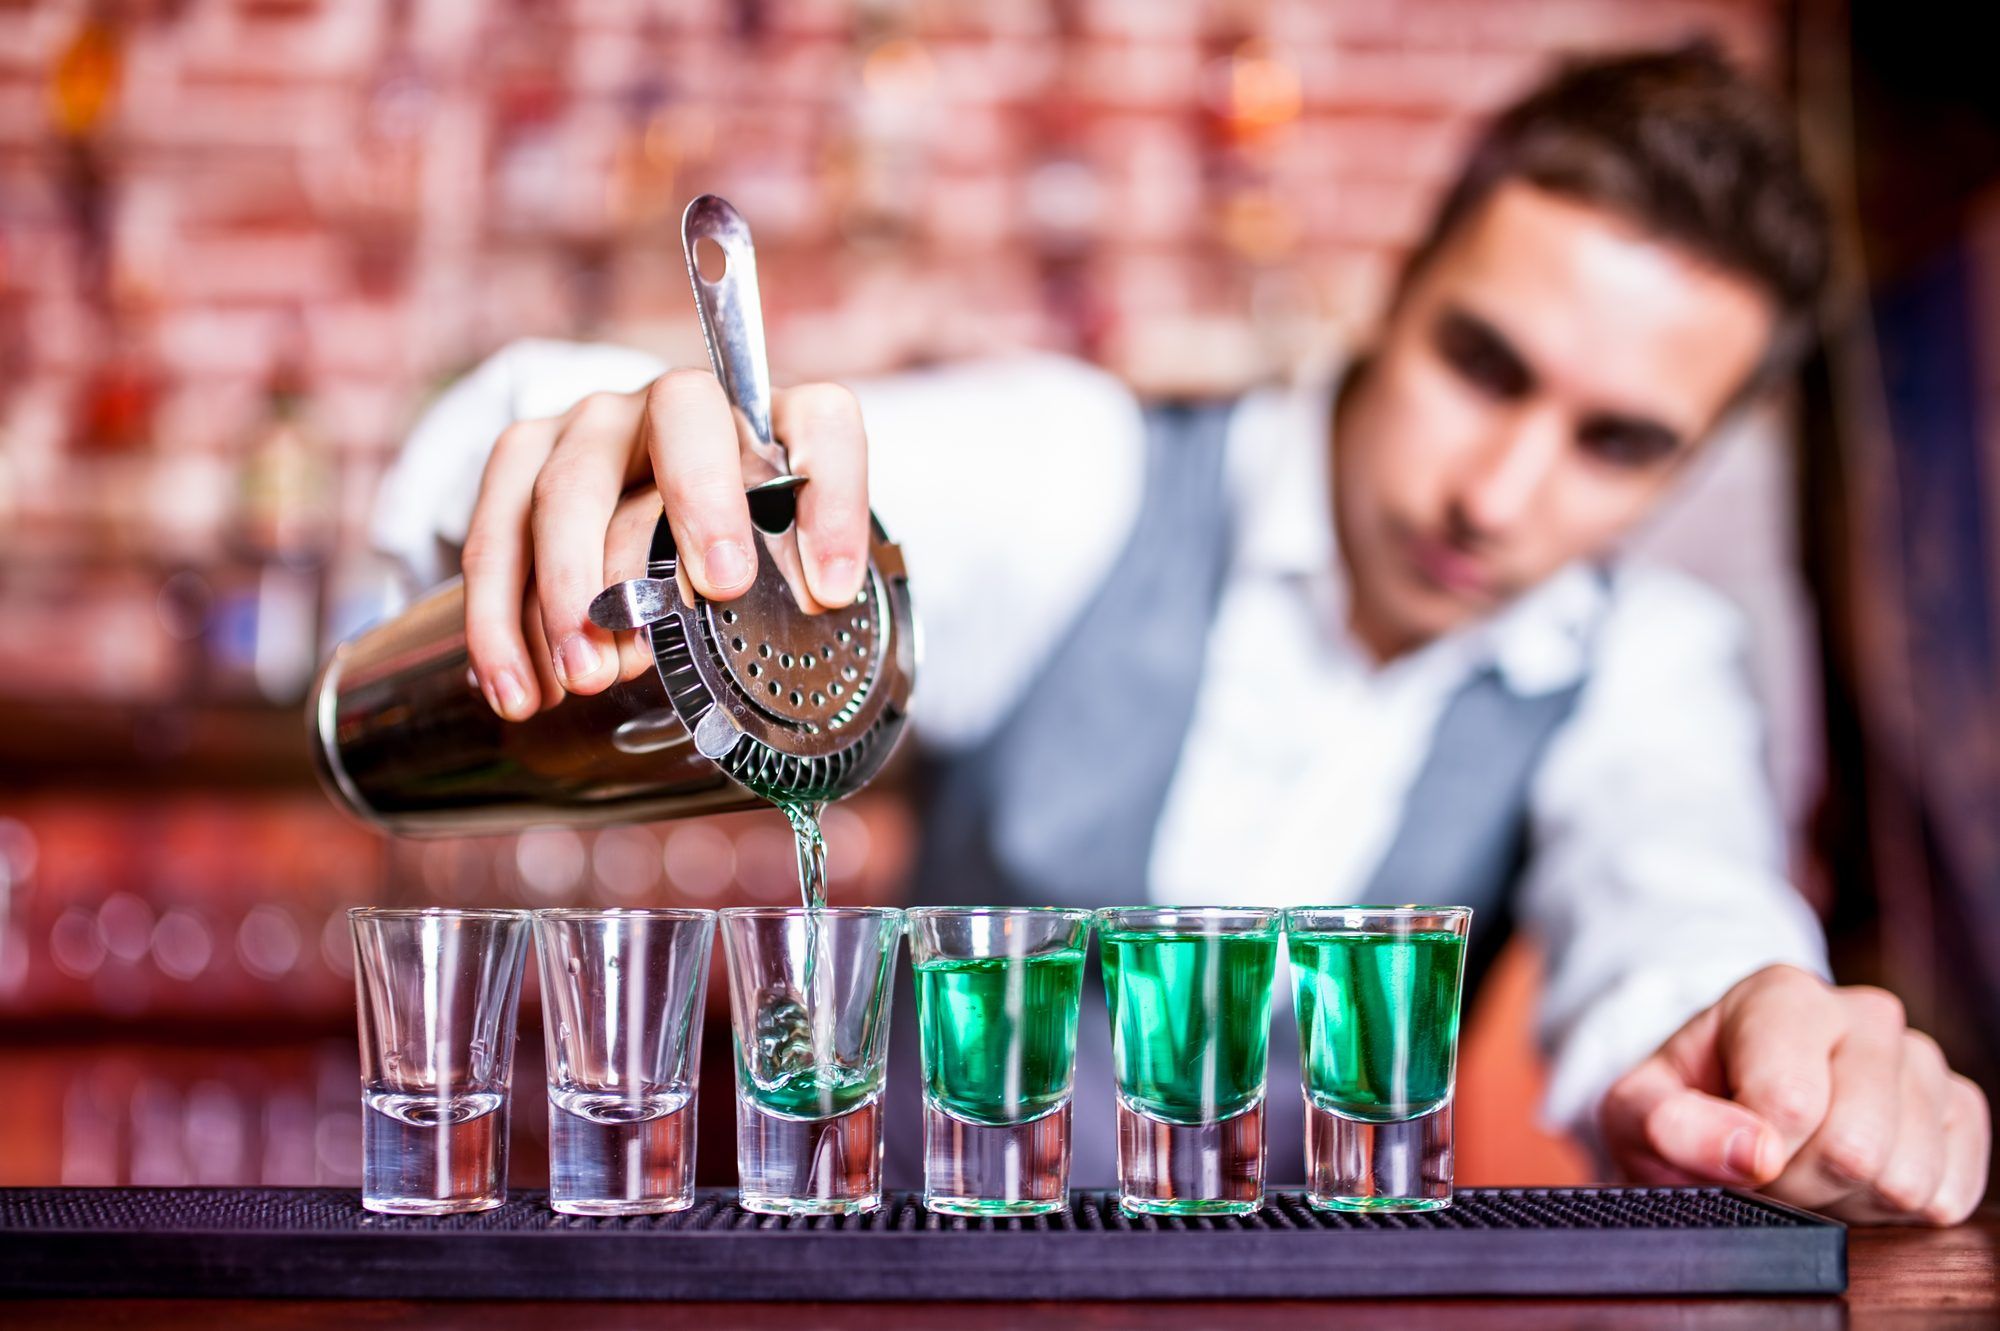 male bartender pouring drinks at bar